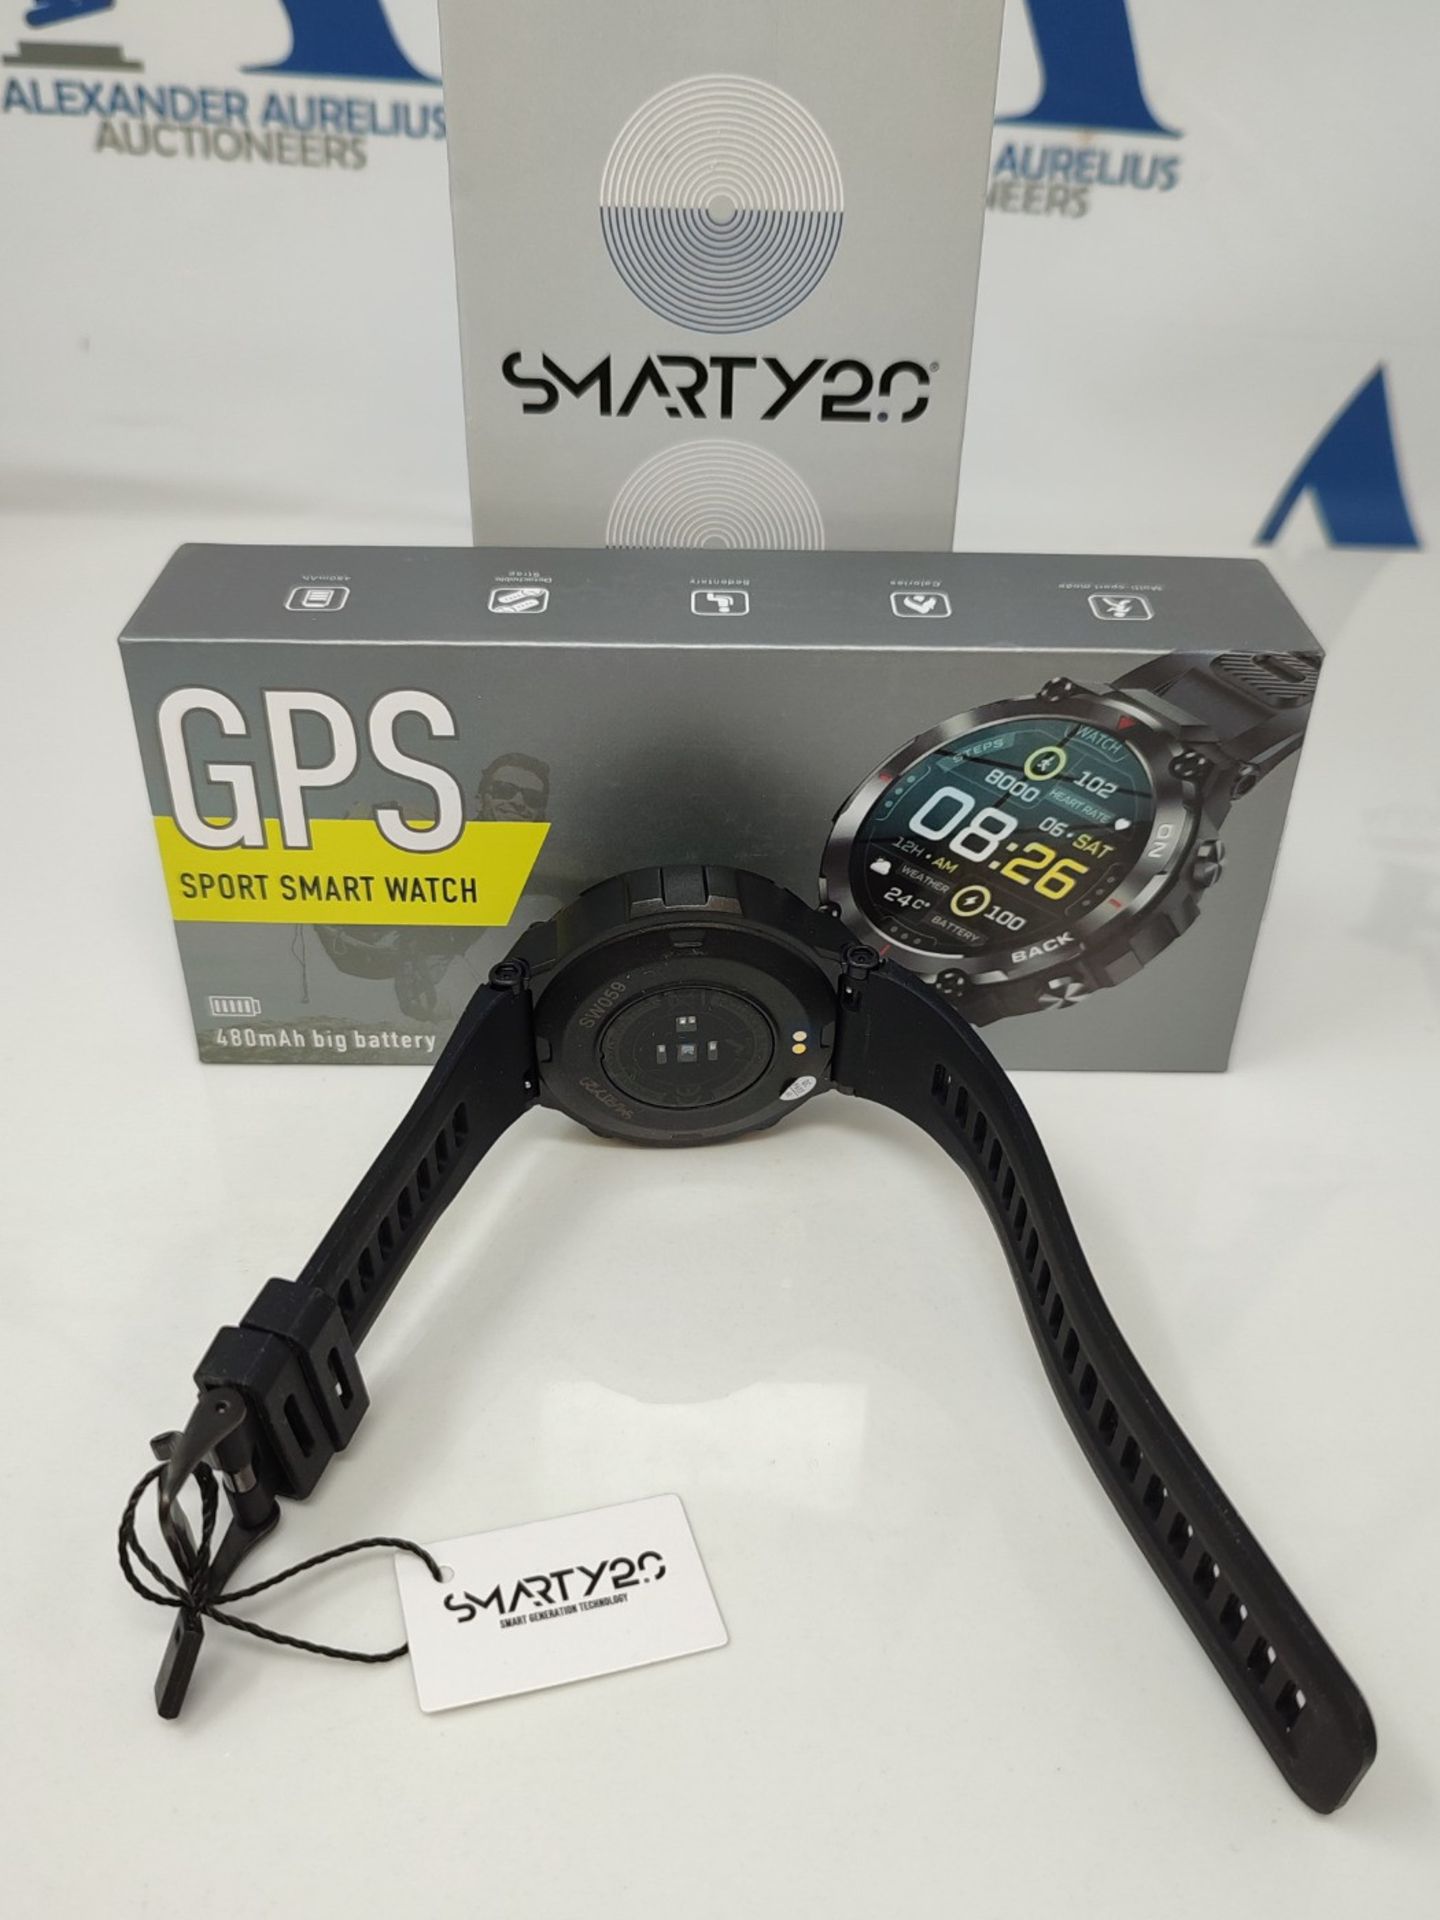 RRP £138.00 SMARTY2.0 - Smartwatch SW059A - Black Color - Optimized GPS, High Efficiency Battery, - Image 6 of 6